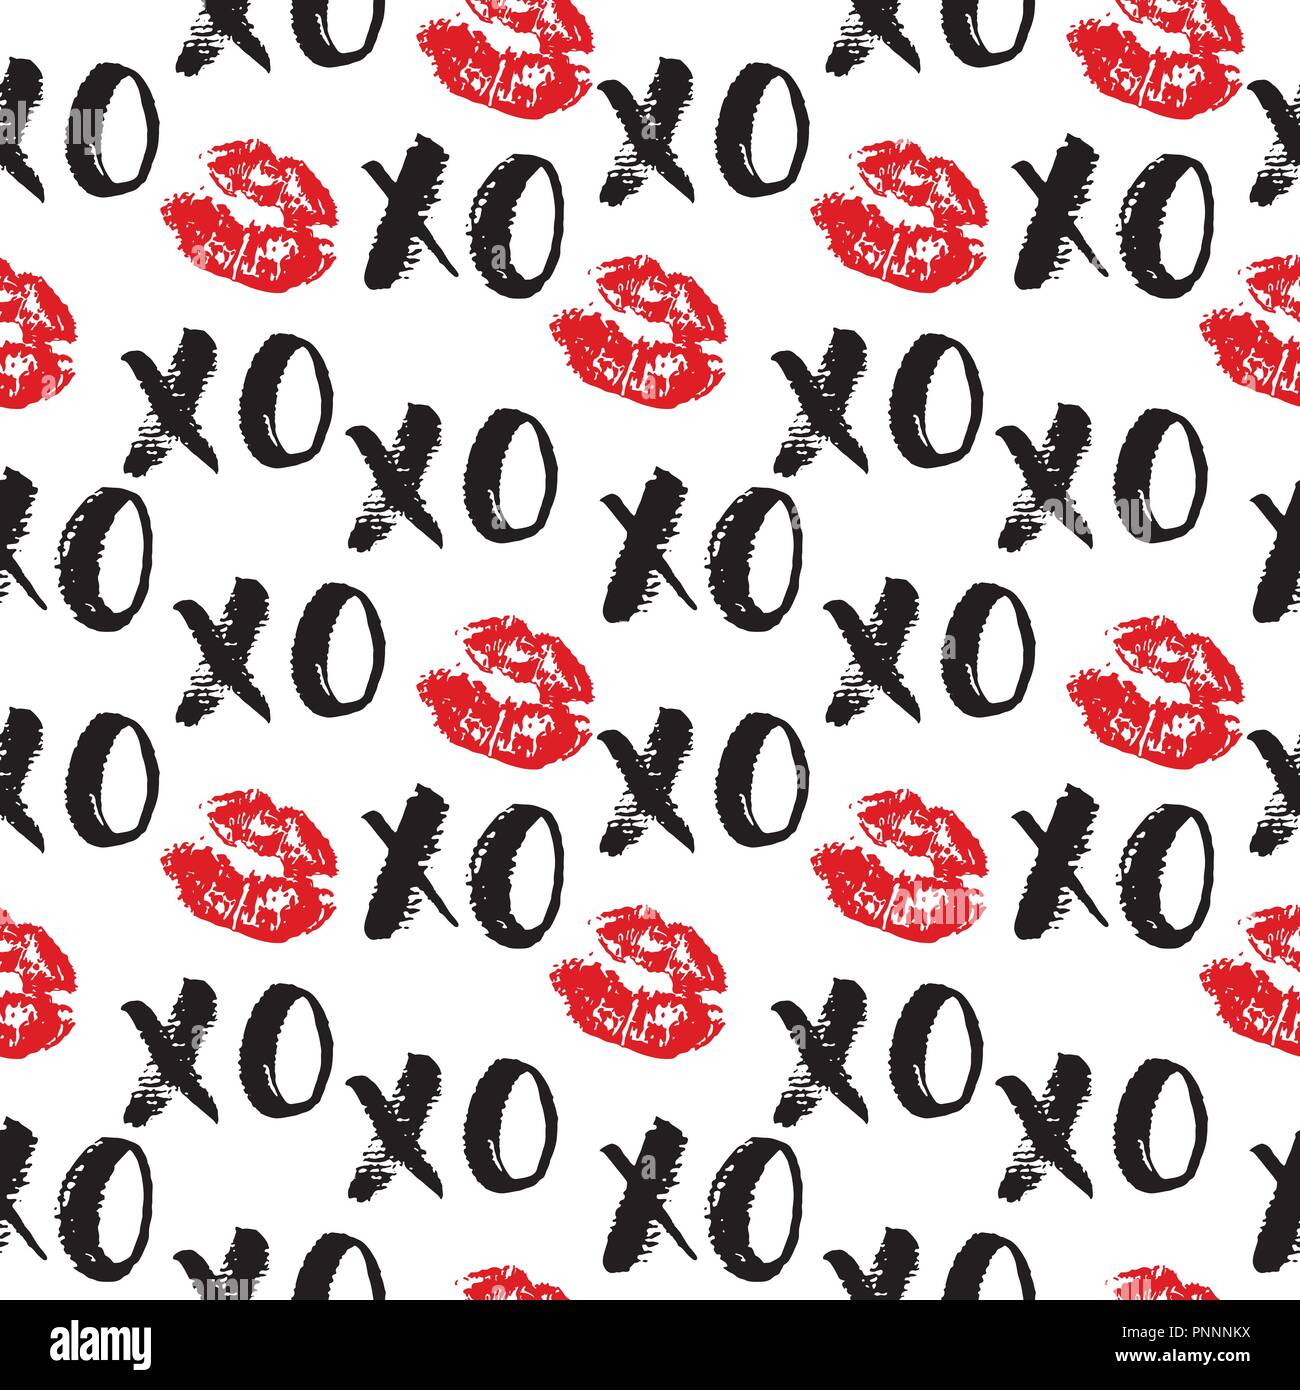 XOXO brush lettering signs seamless pattern, Grunge calligraphiv c